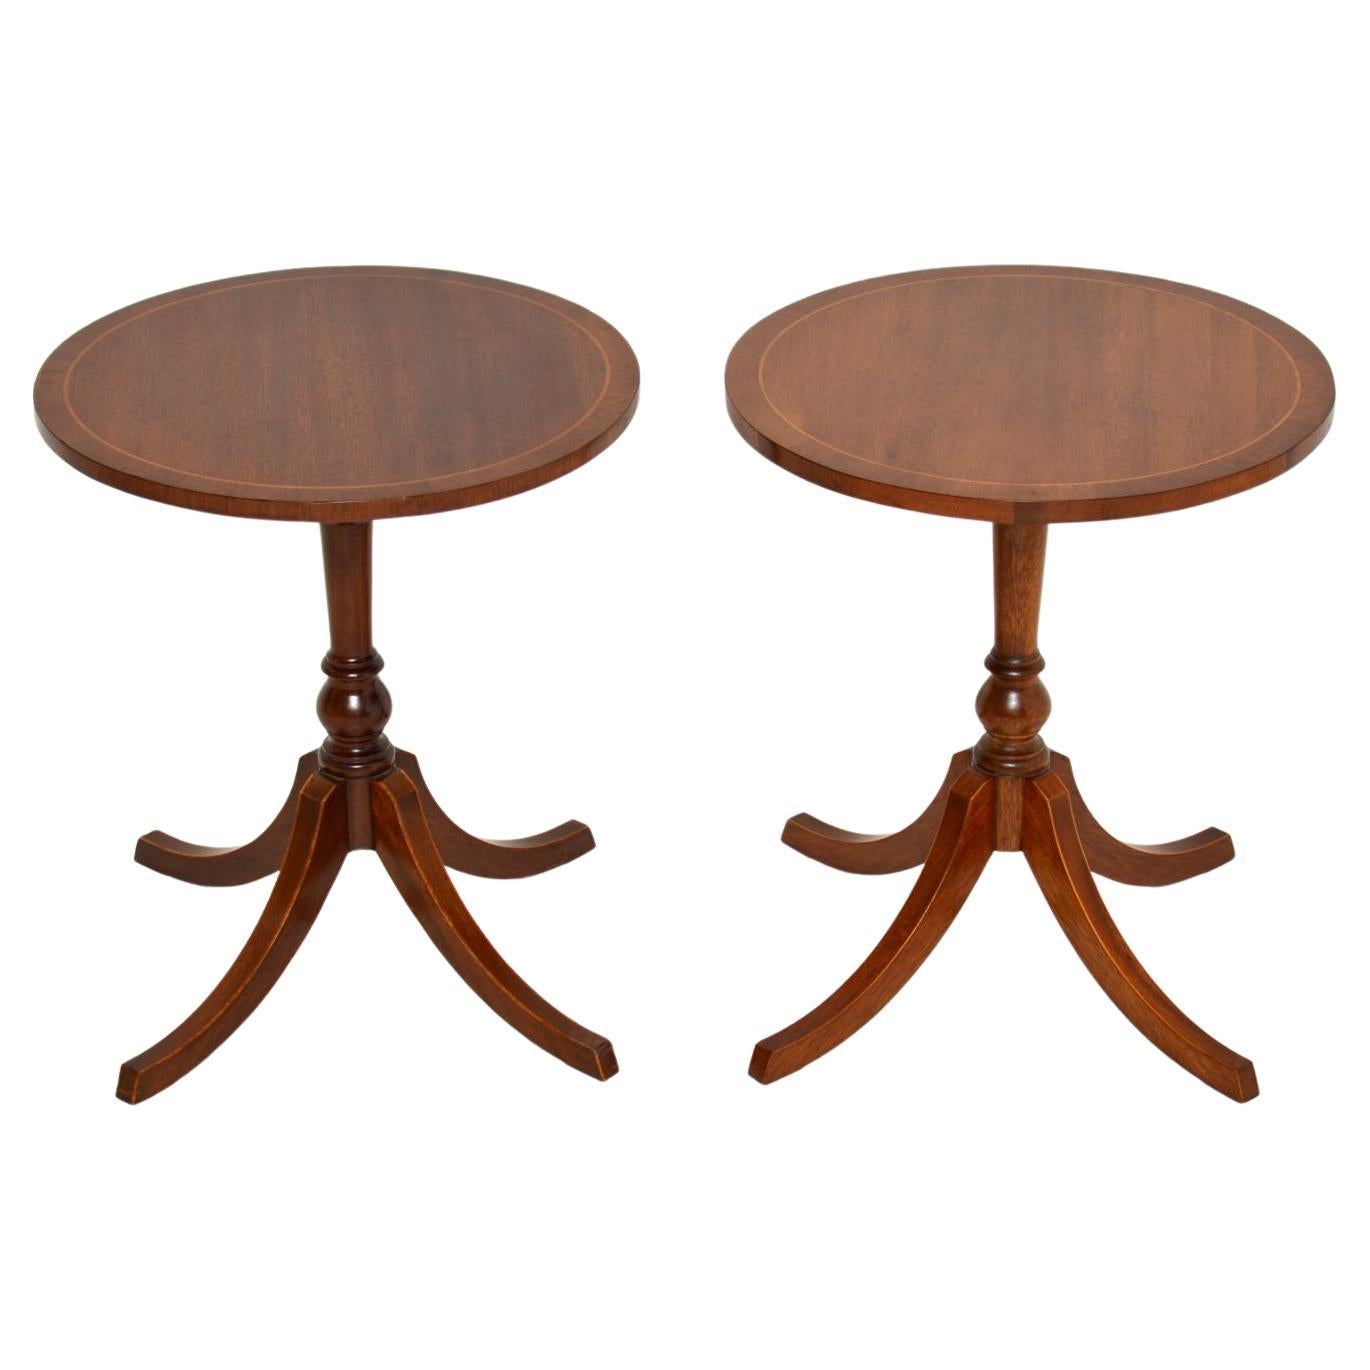 Pair of Antique Regency Style Inlaid Wine Tables